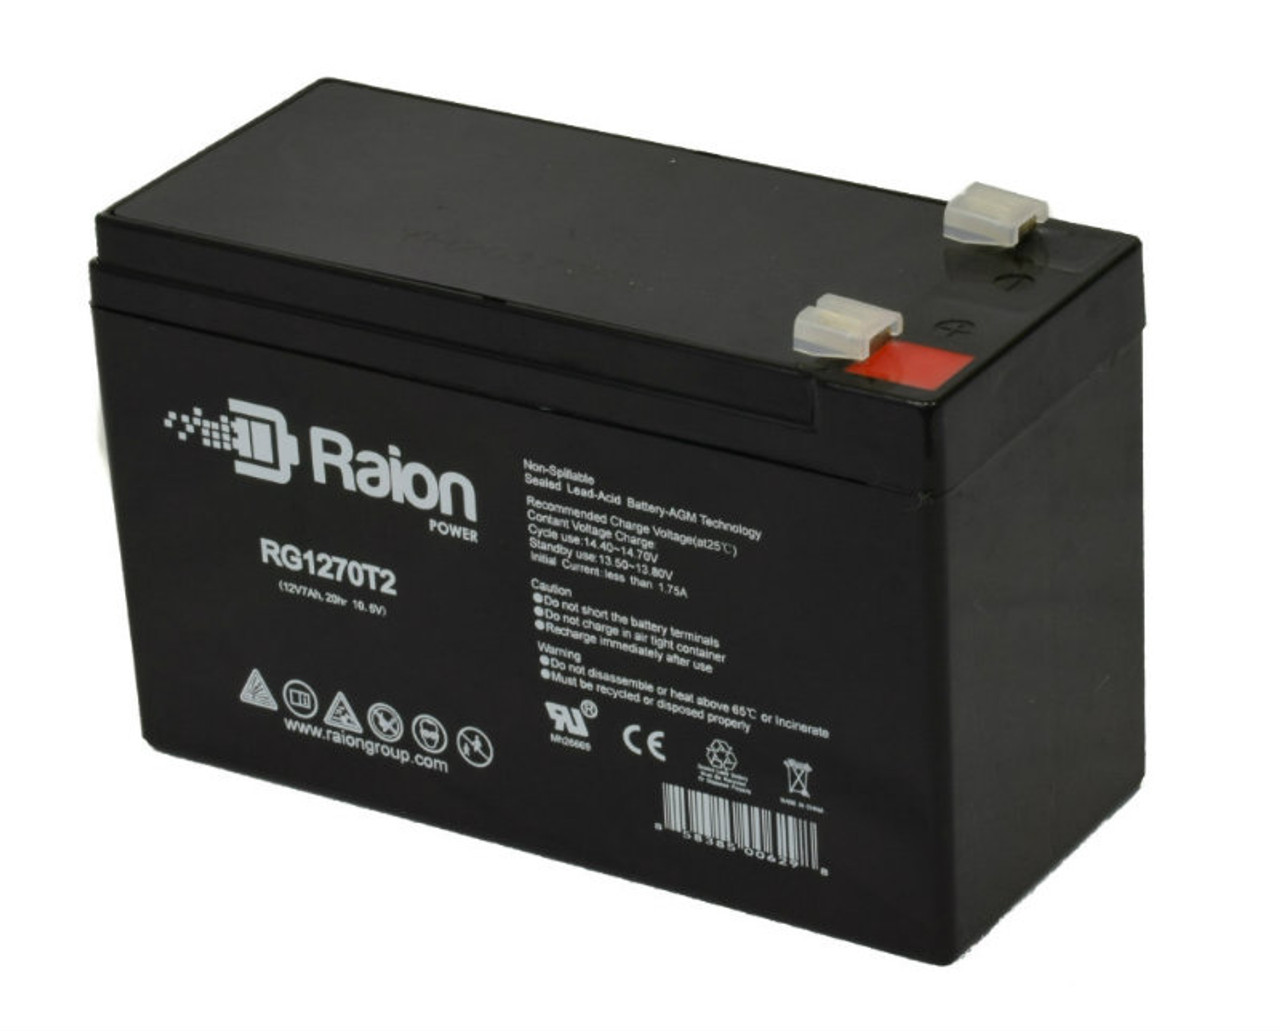 Raion Power RG1270T1 12V 7Ah Non-Spillable Replacement Battery for MHB MS7-12 F1